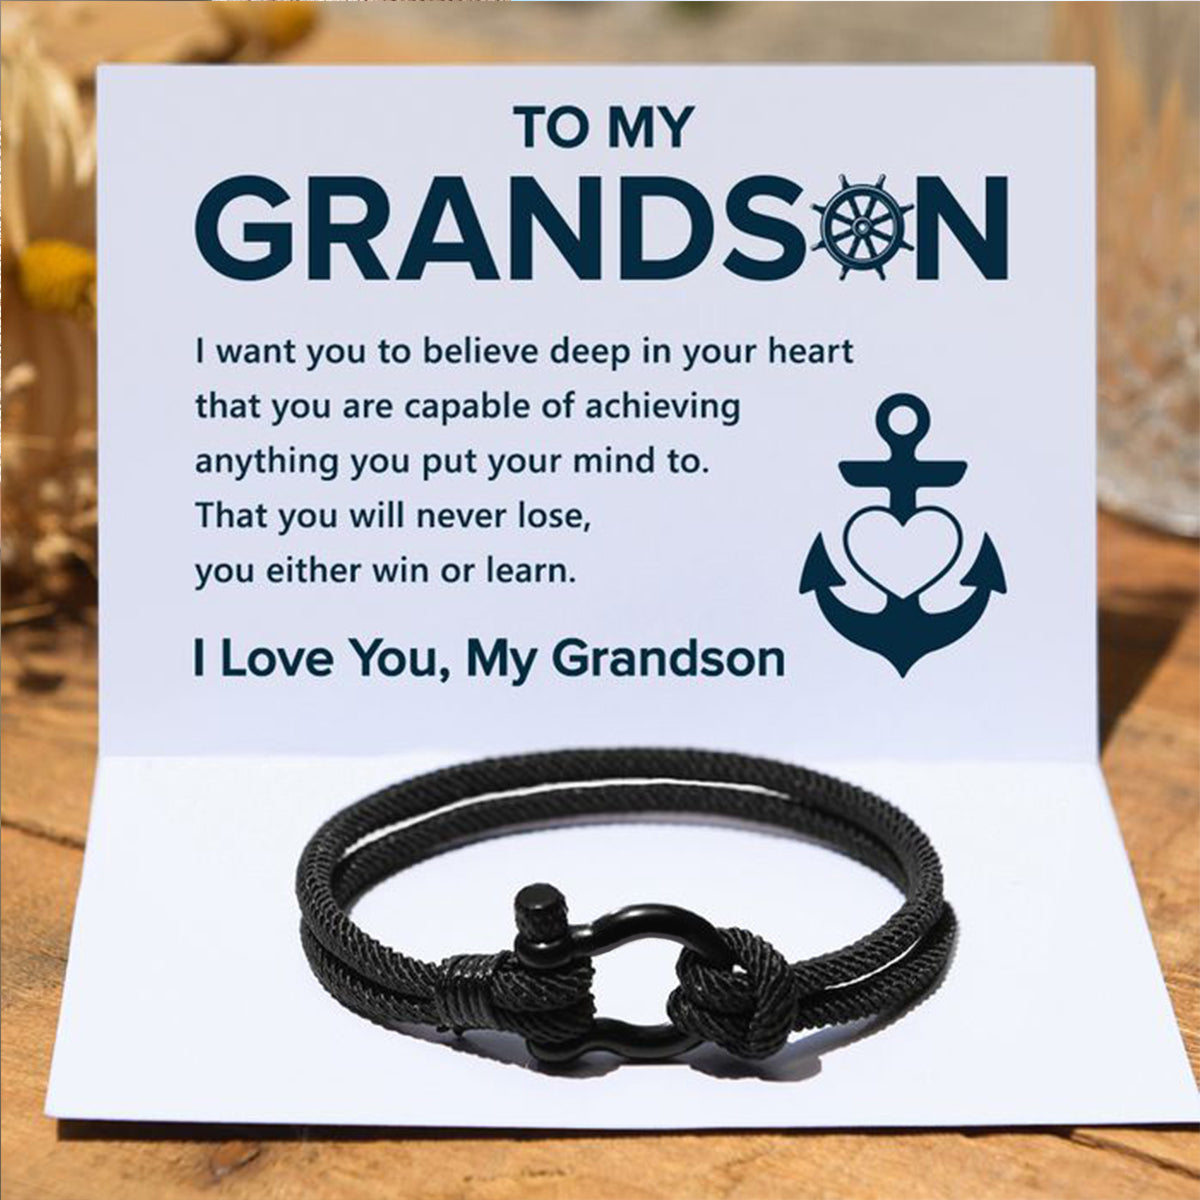 To My Grandson - You Will Never Lose - Bracelet